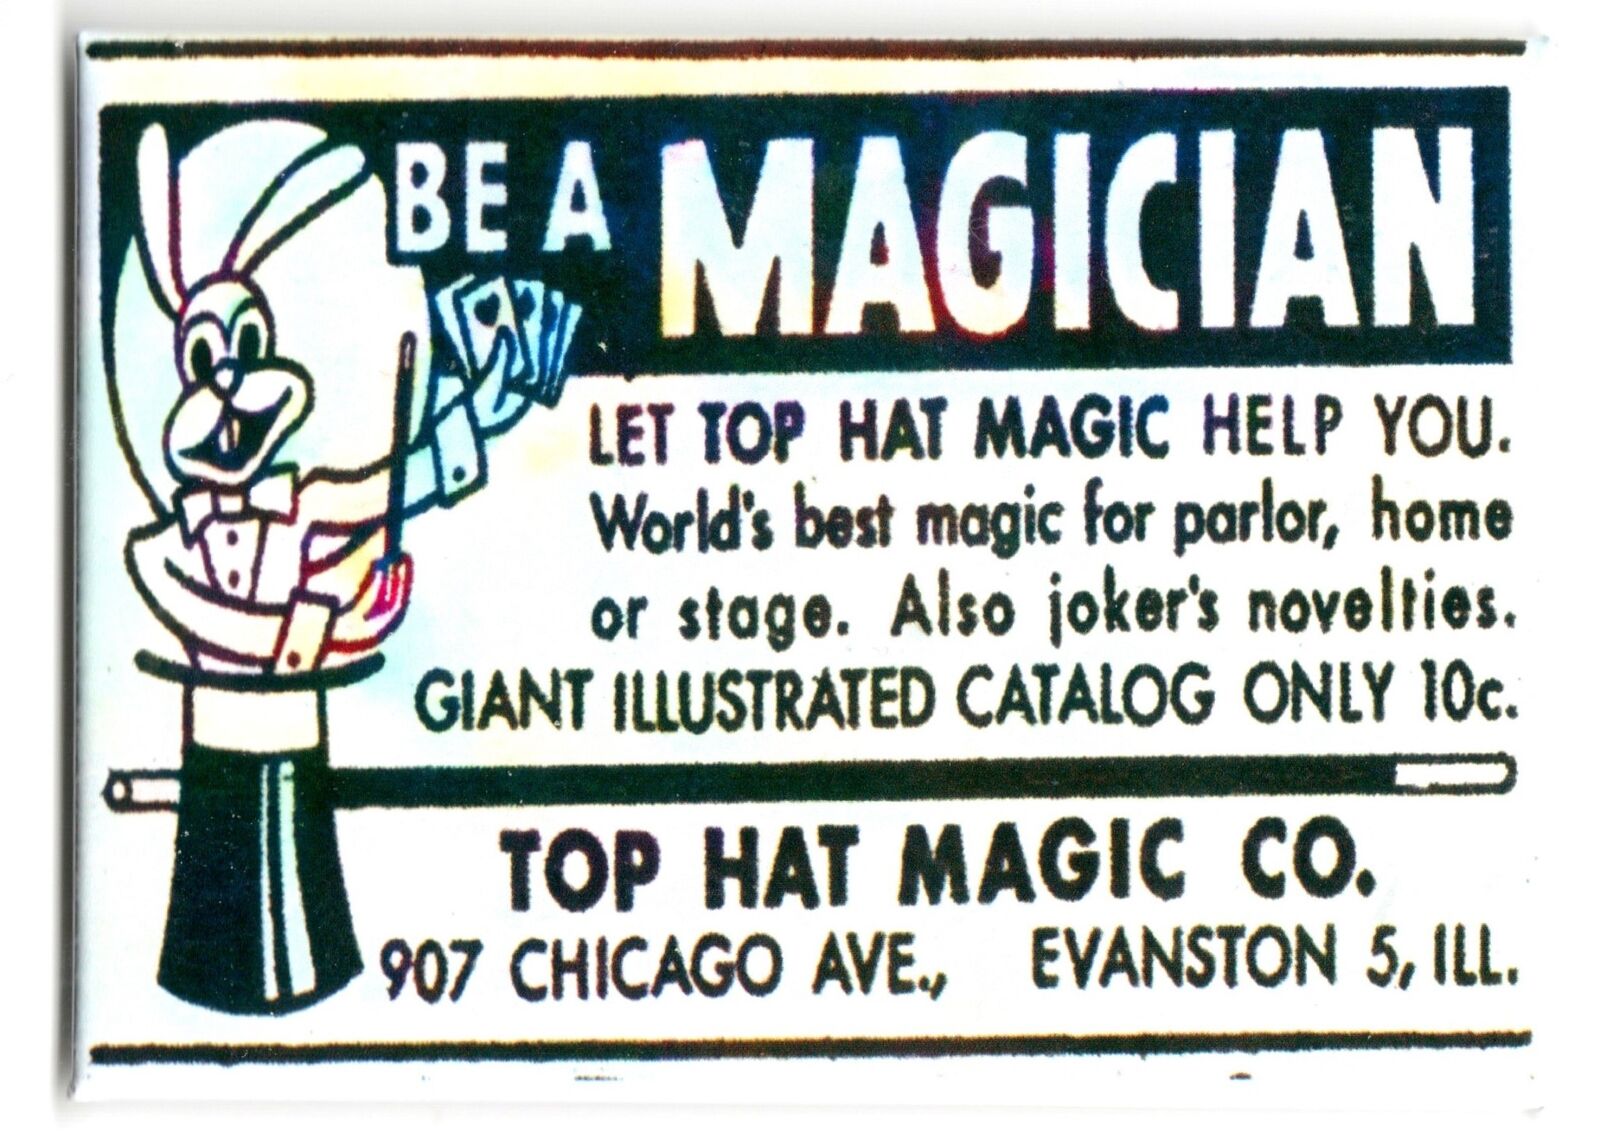 Vintage Magician Fridge Magnet 2.5 x 3.5 Inches 1.5k mags in store